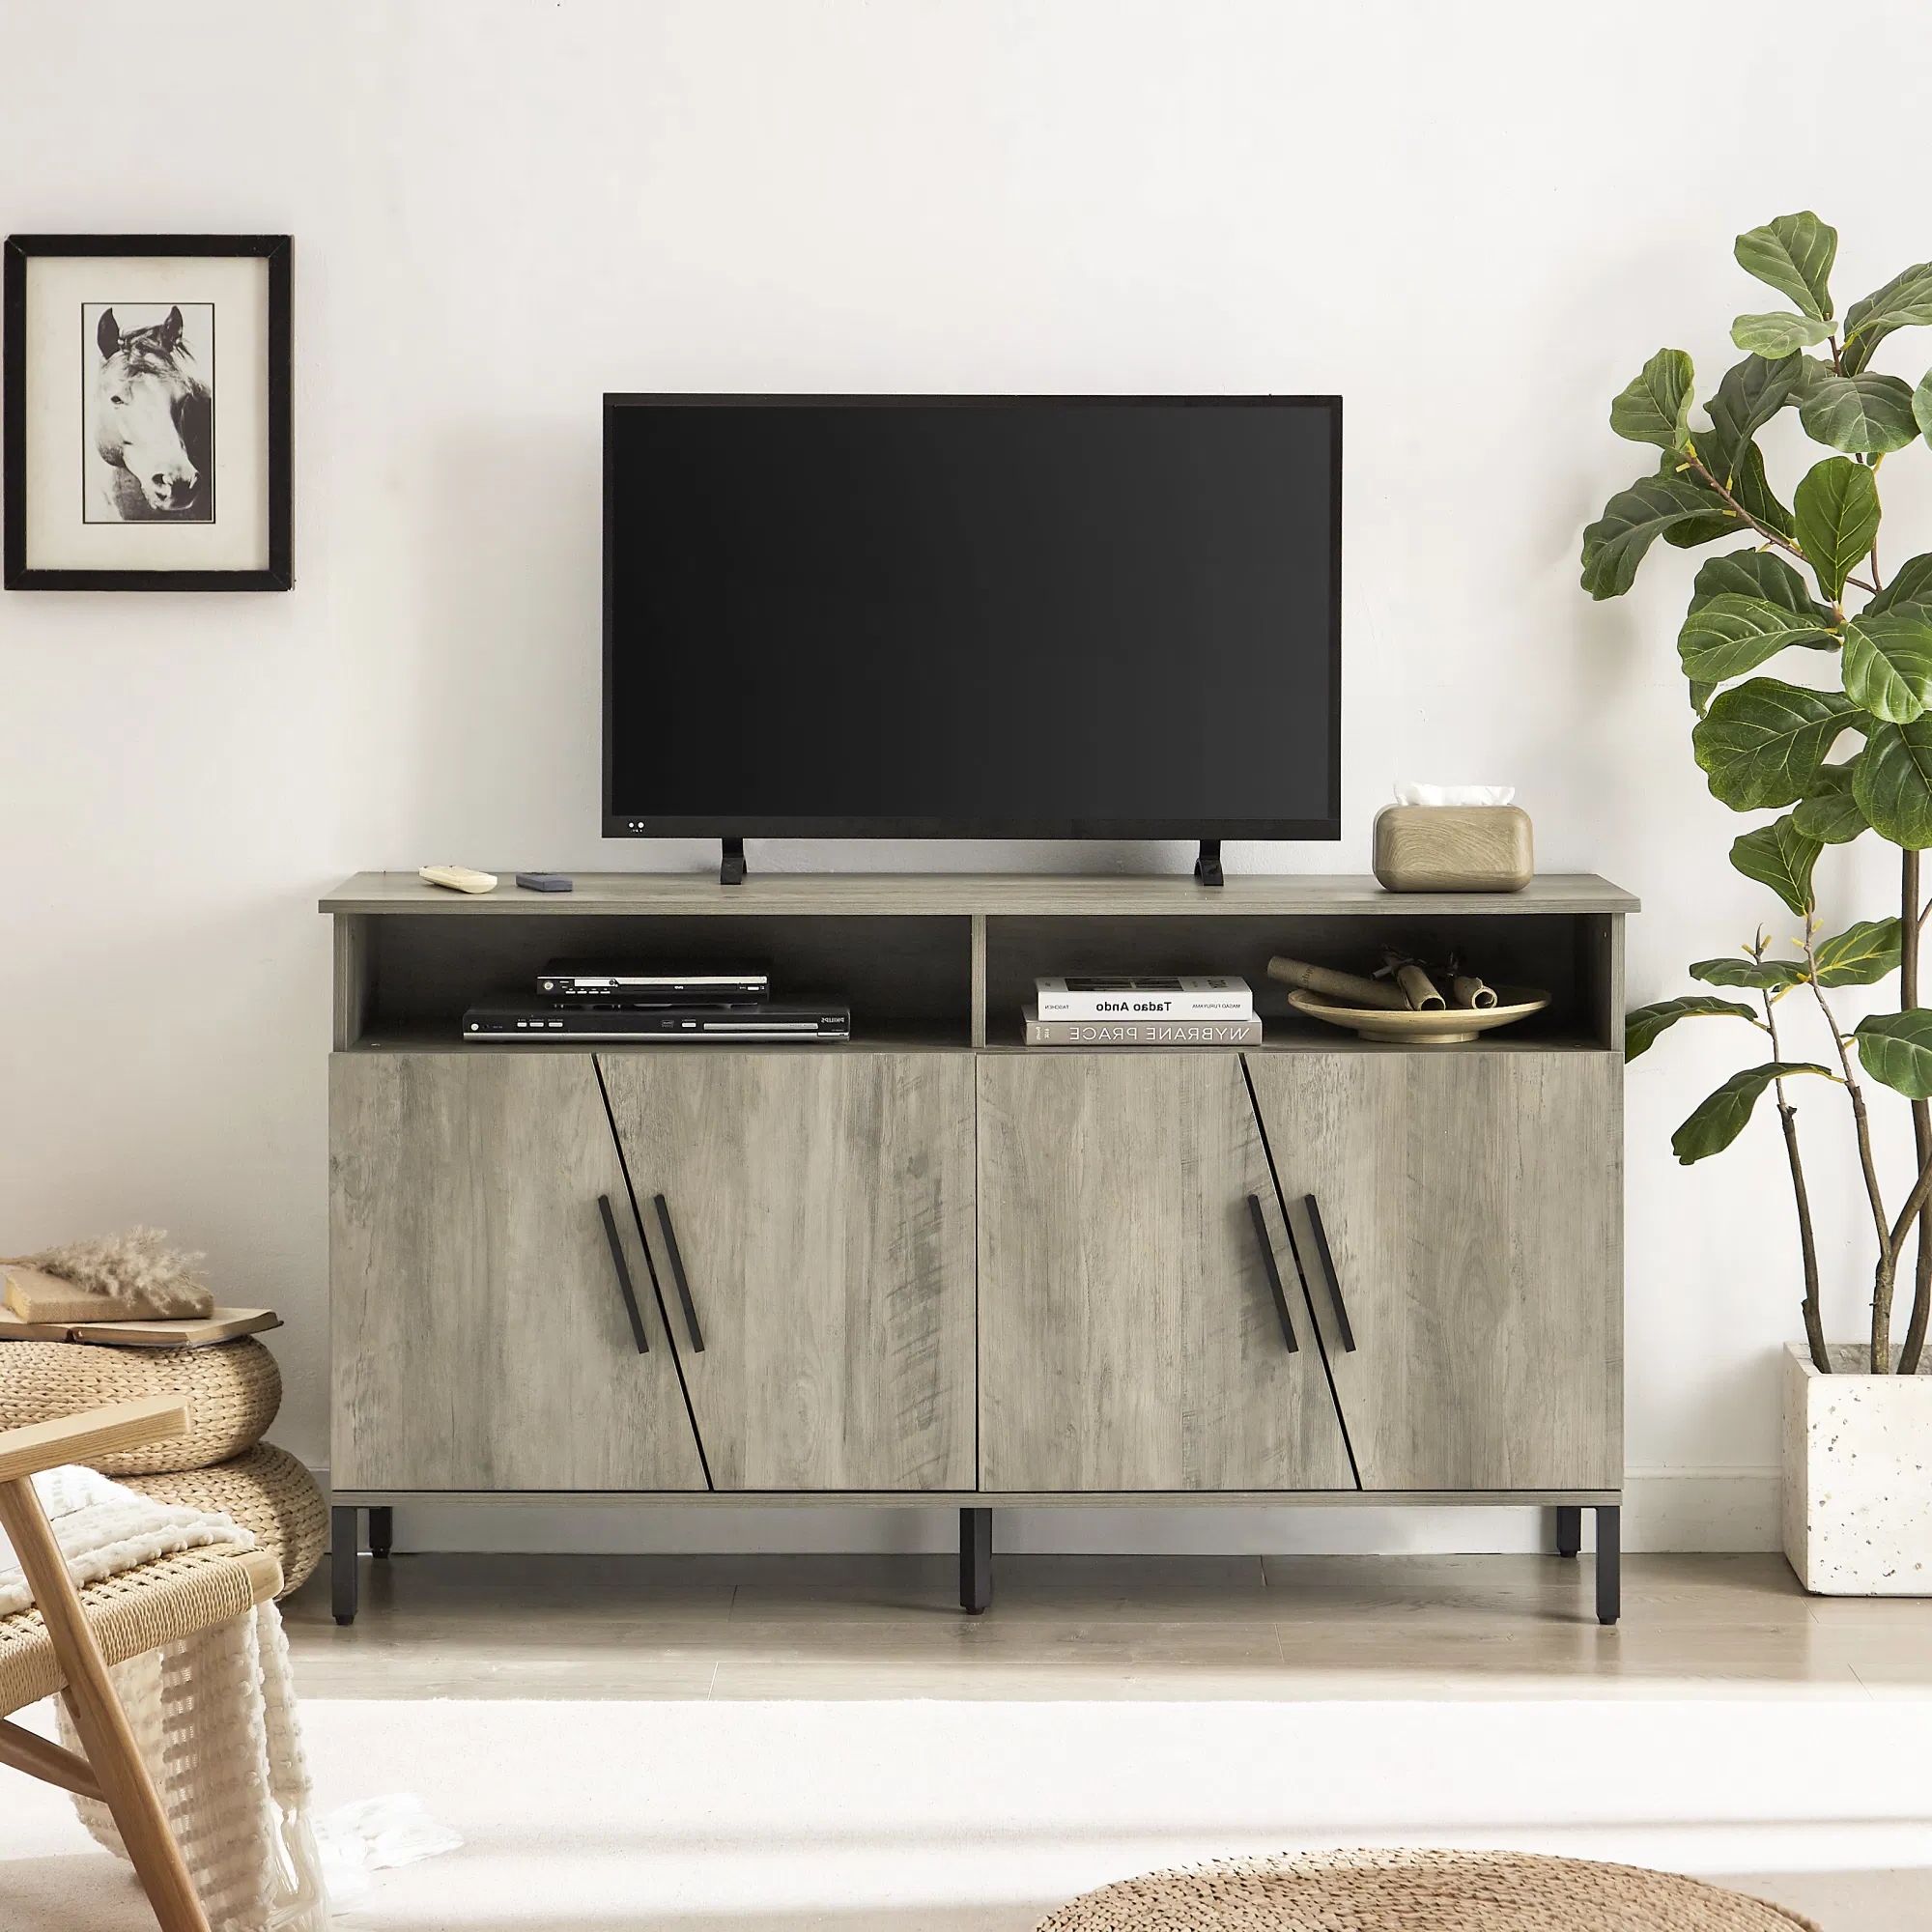 Dropship Farmhouse Style Tv Stand, Tv Station With Storage And Open  Drawers, Entertainment Center Console Table, Living Room Media Furniture.  Grey, 58''w X 15.75''d X  (View 18 of 20)